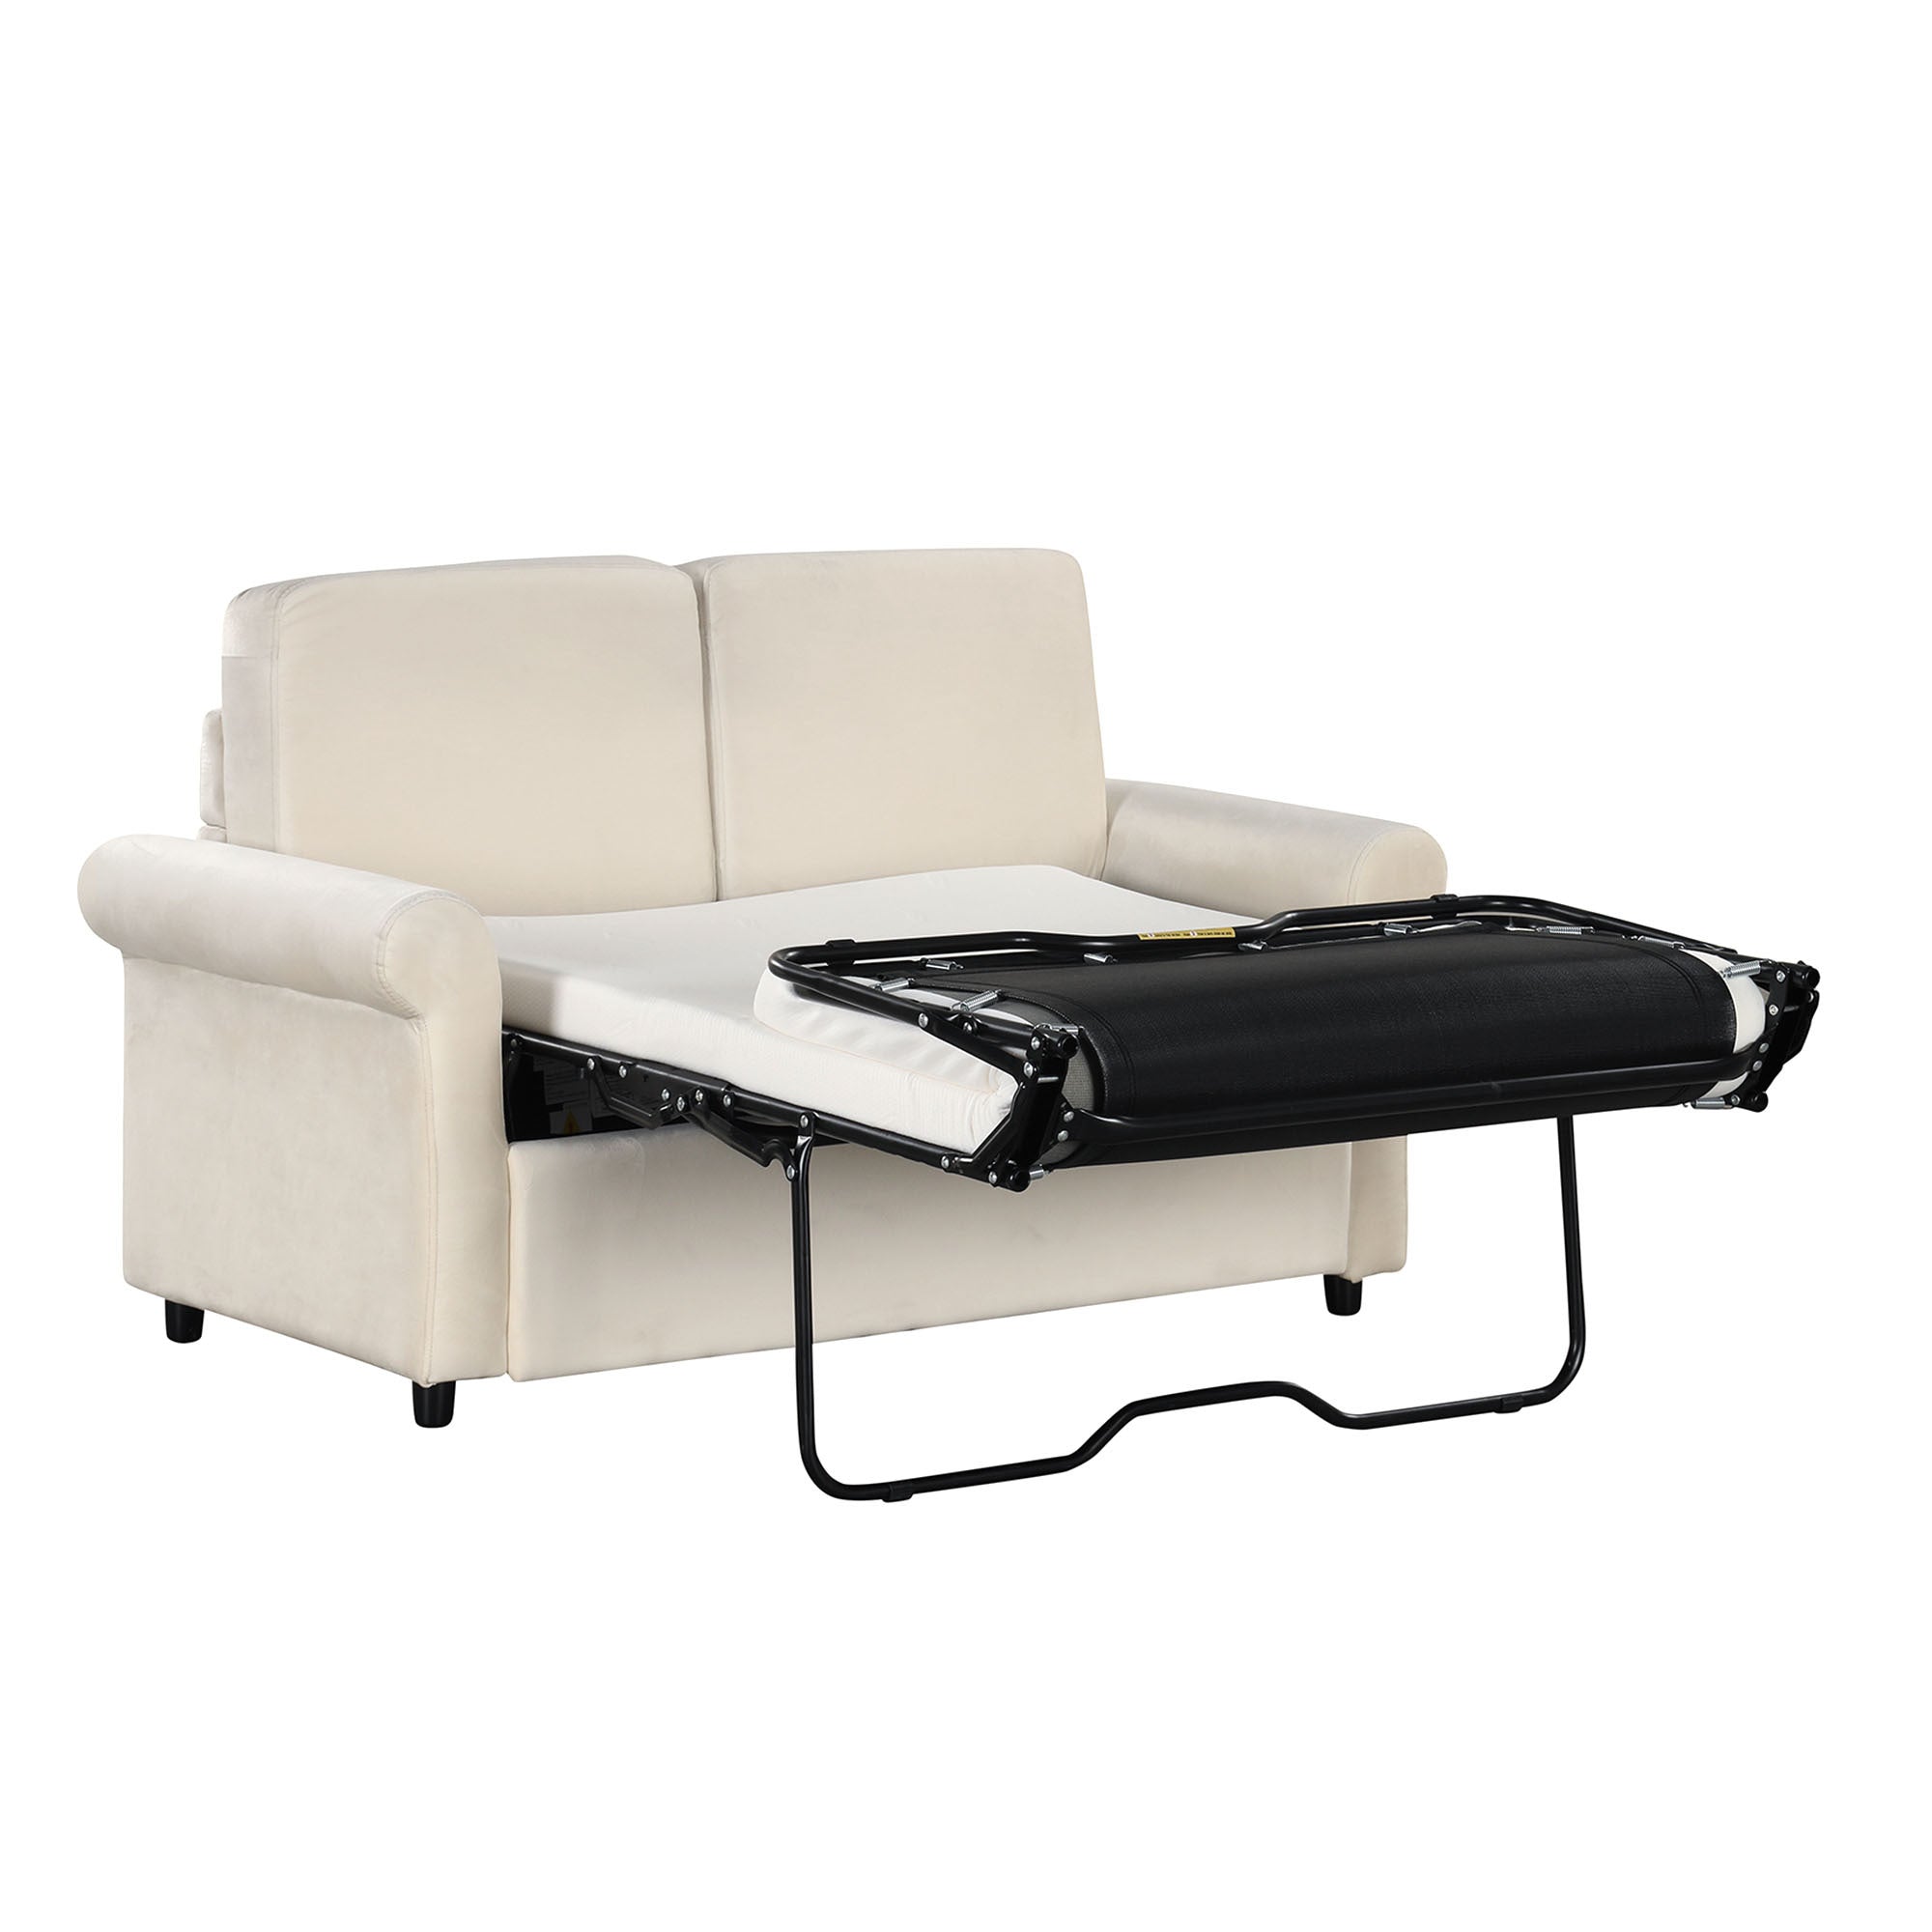 57.4" Pull Out Sofa Bed,Sleeper Sofa Bed with Premium beige-foam-velvet